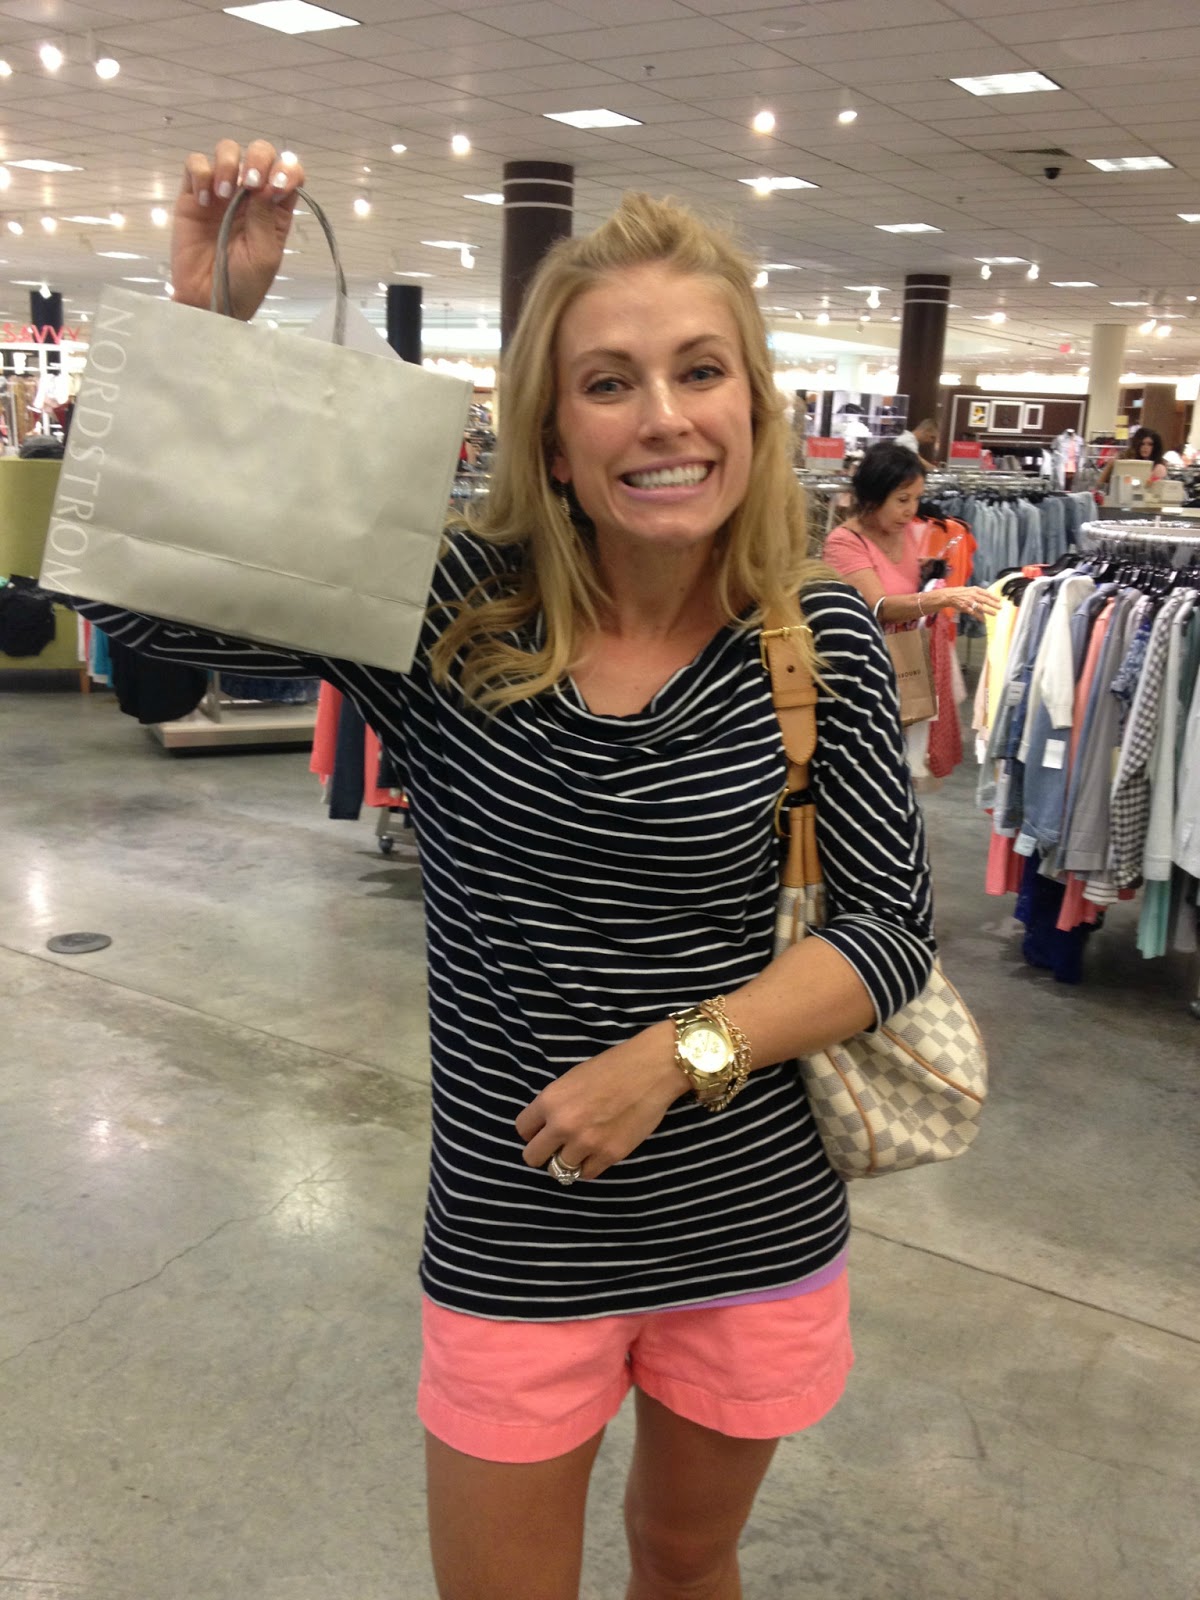 Shopping With Sheaffer and Shay! — Sheaffer Told Me To